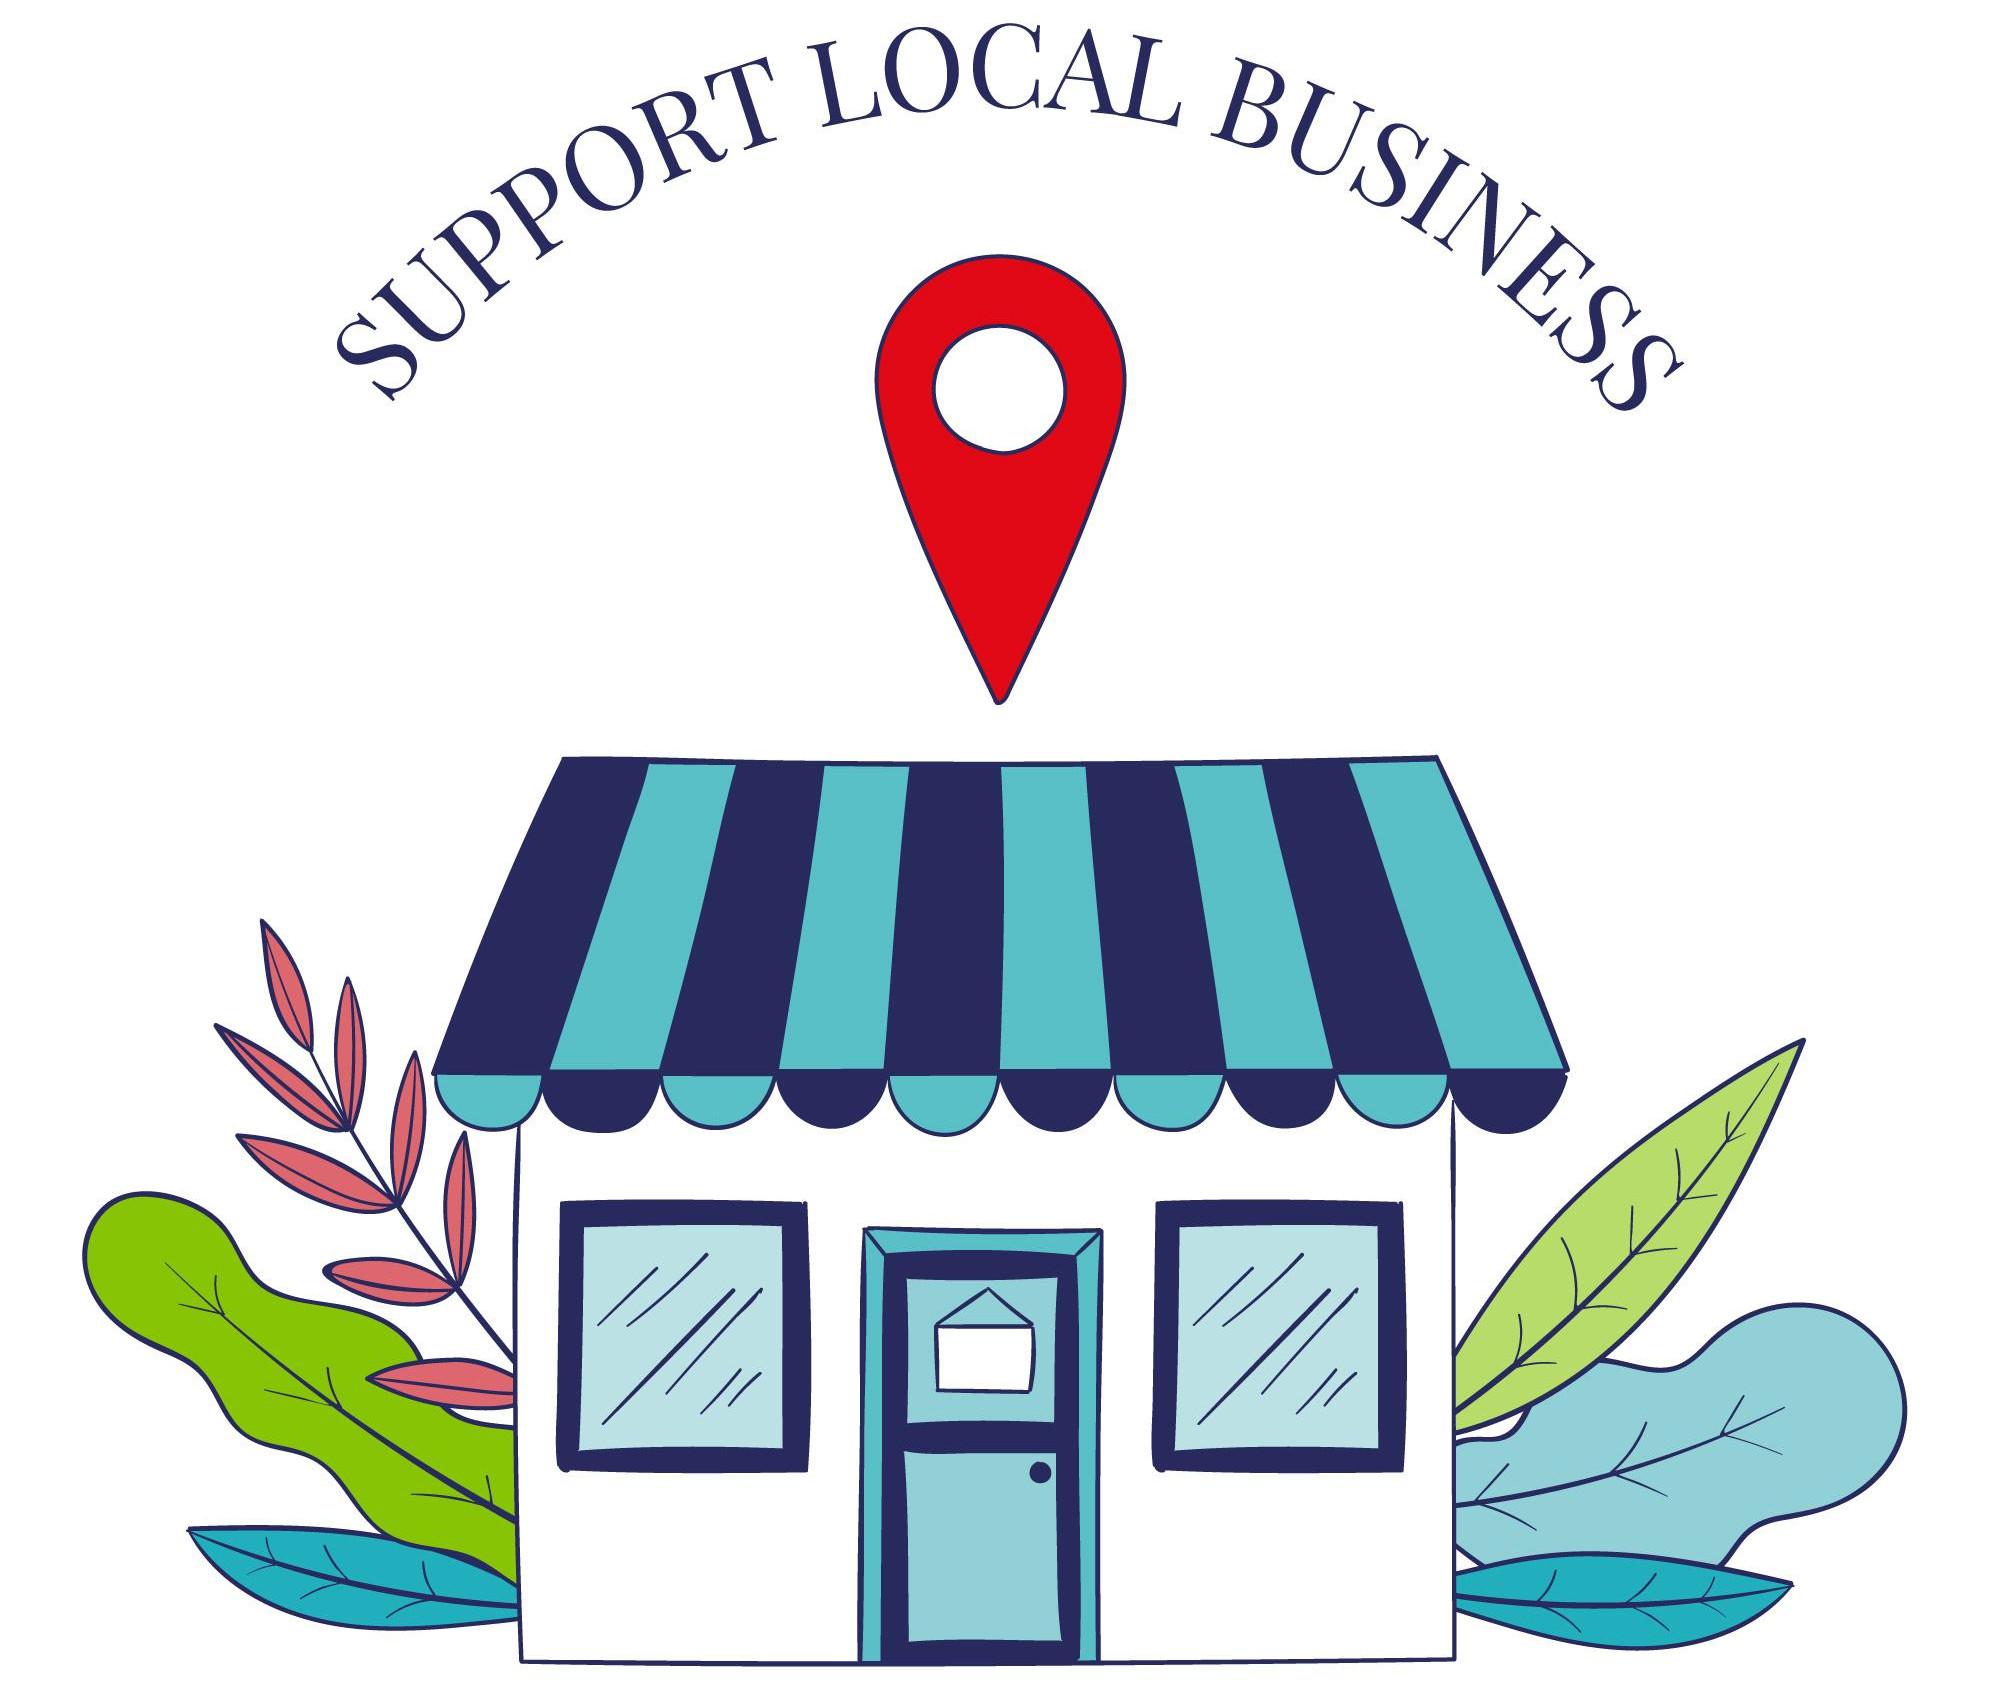 Please support your local businesses